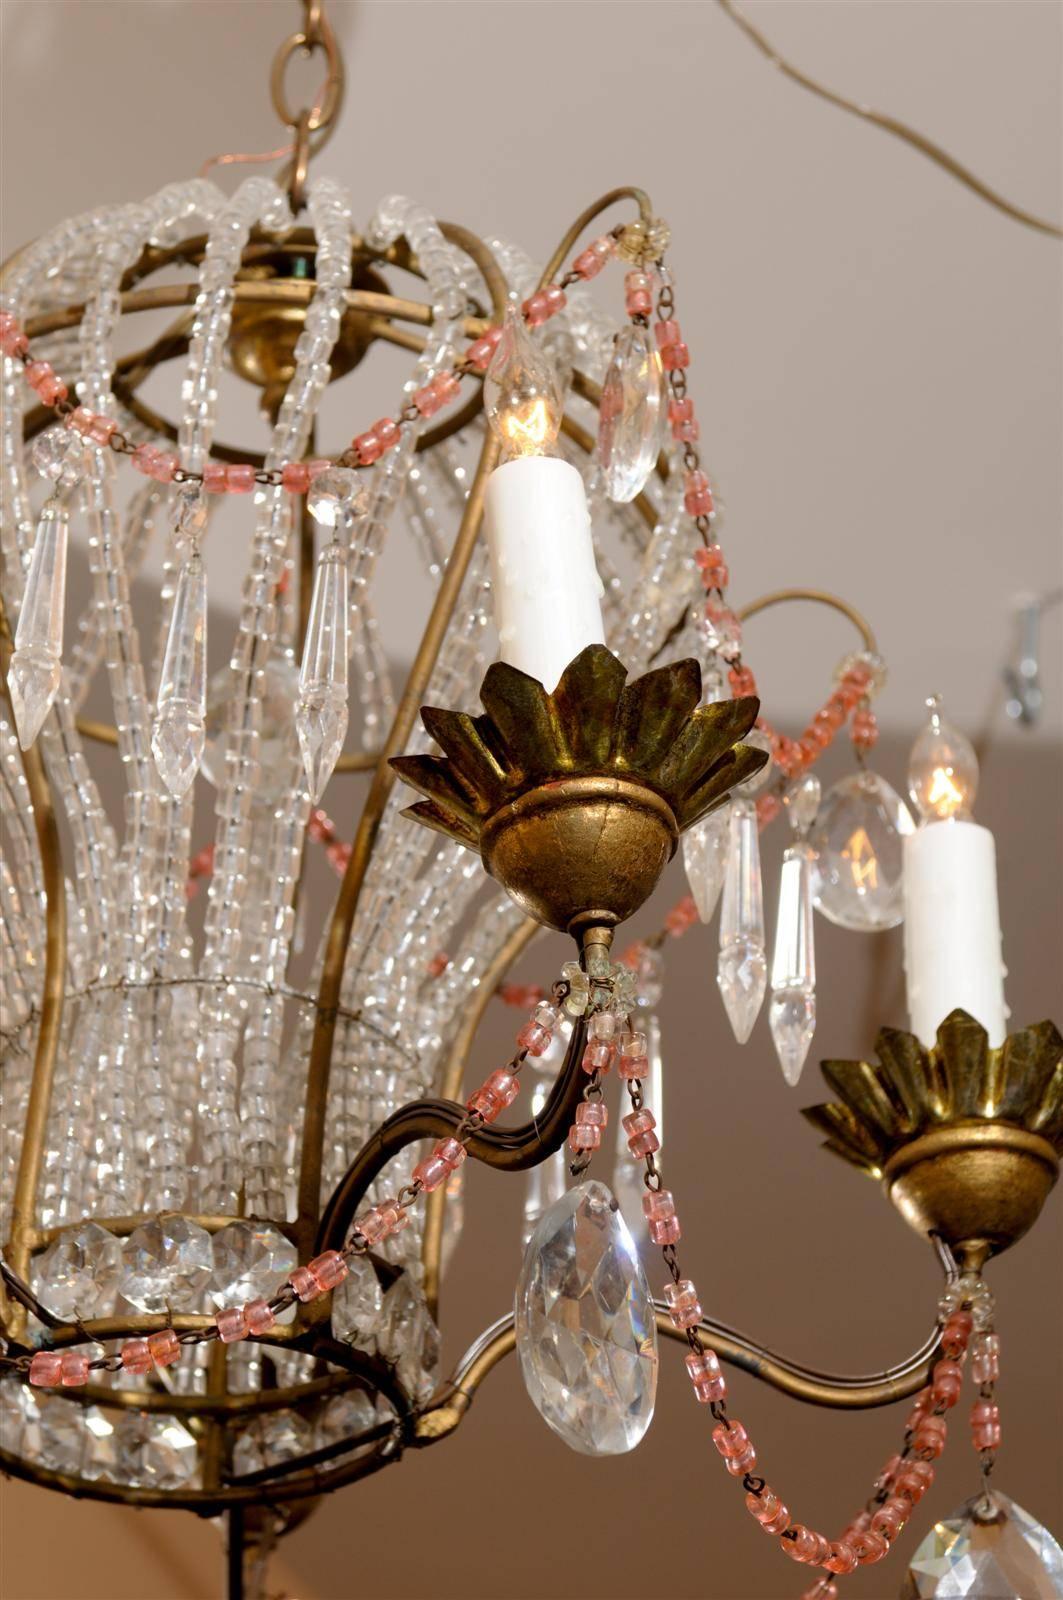 This French five-light glass and crystal chandelier from the mid 20th century features a whimsical balloon shape. The gilded structure supports vertical glass beads, placed in such a manner that we can immediately identify it as a Montgolfière! This